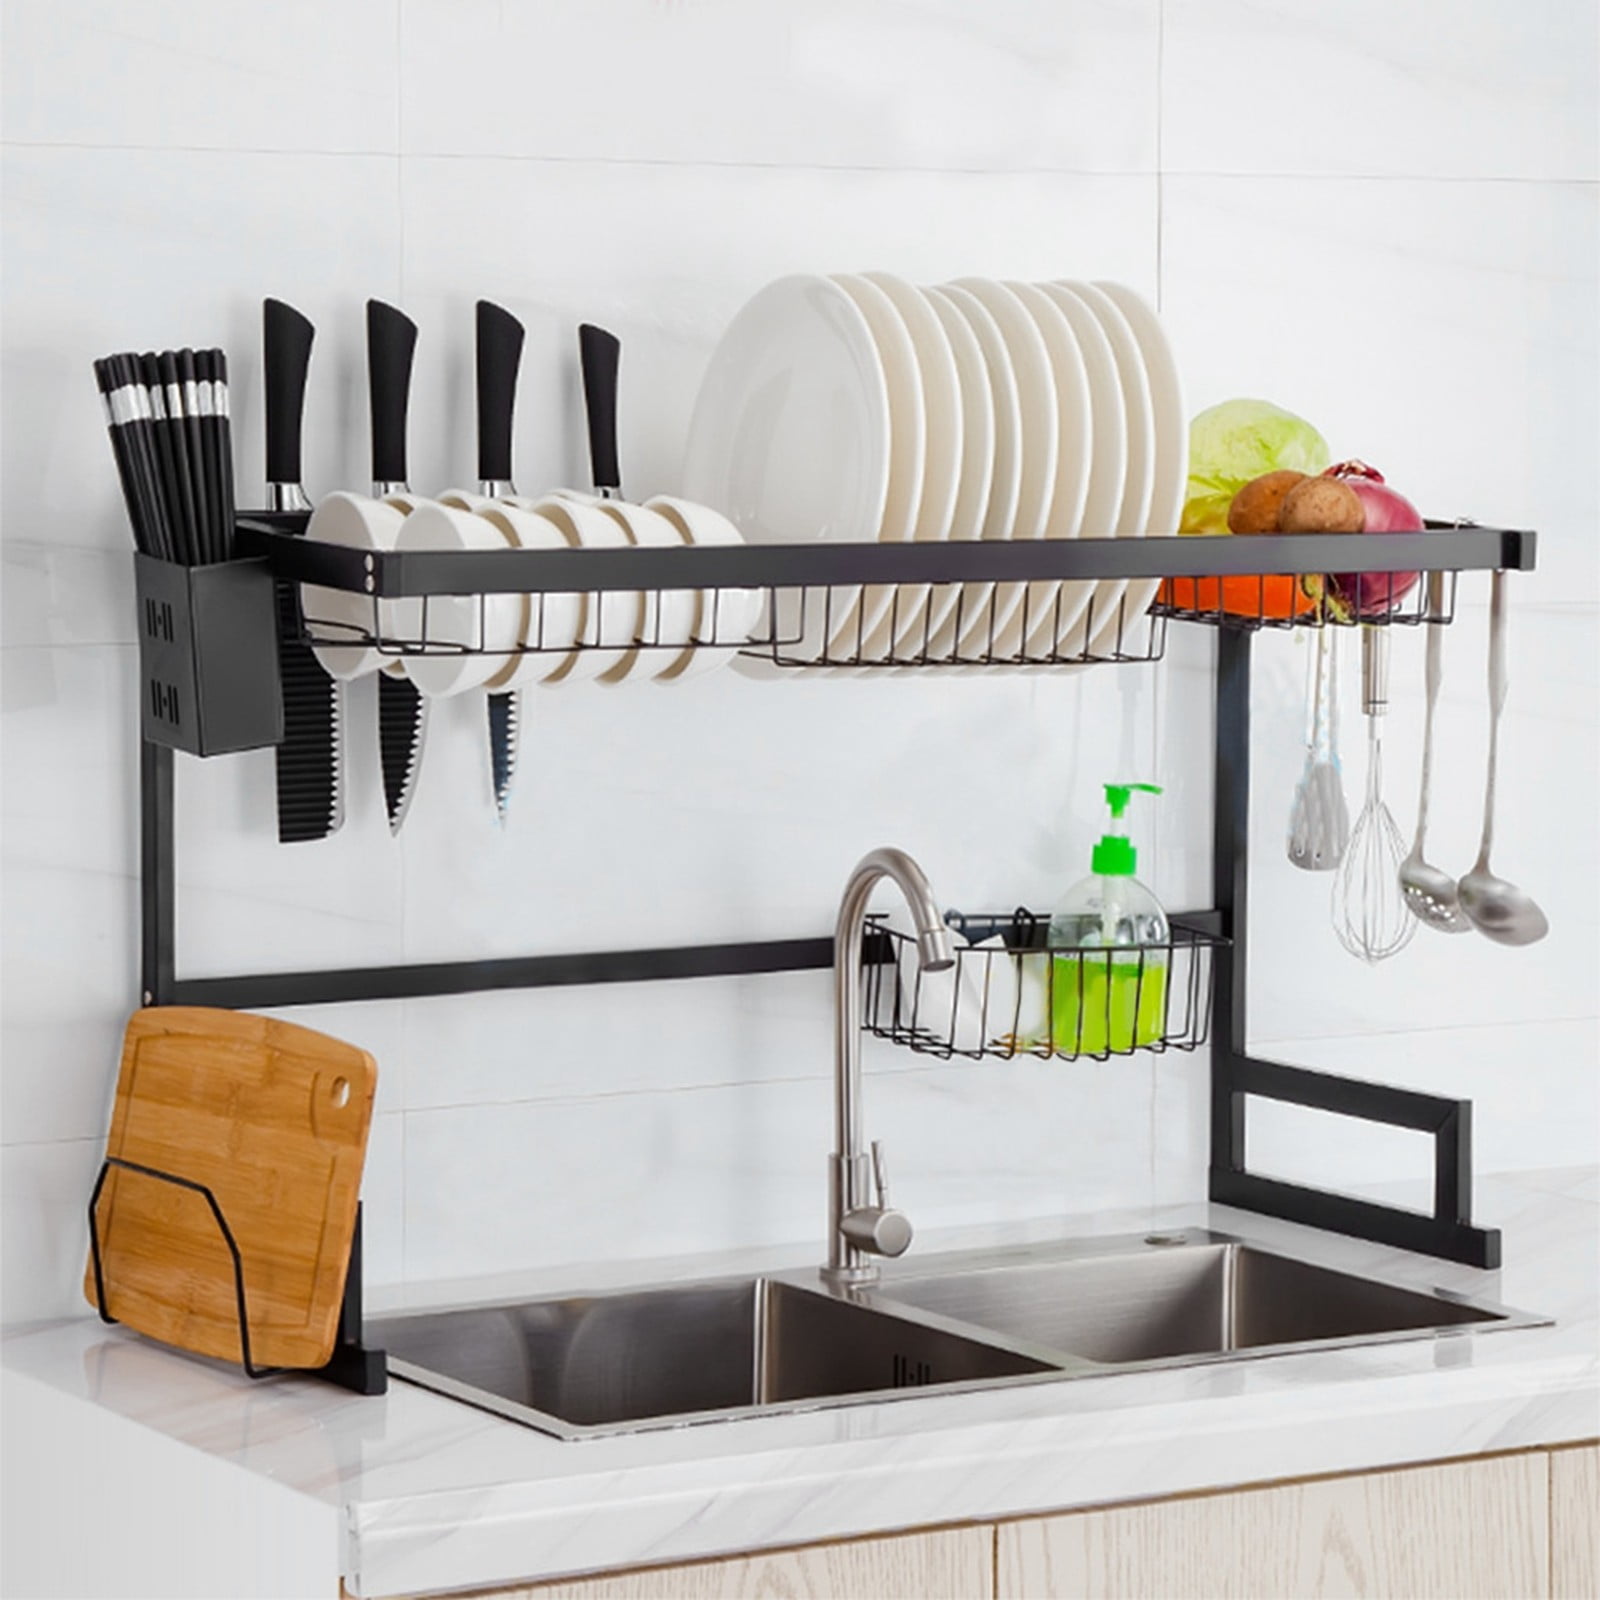 Details about   Over Sink Dish Drying Rack Drainer Shelf Stainless Steel Kitchen Cutlery Holder 